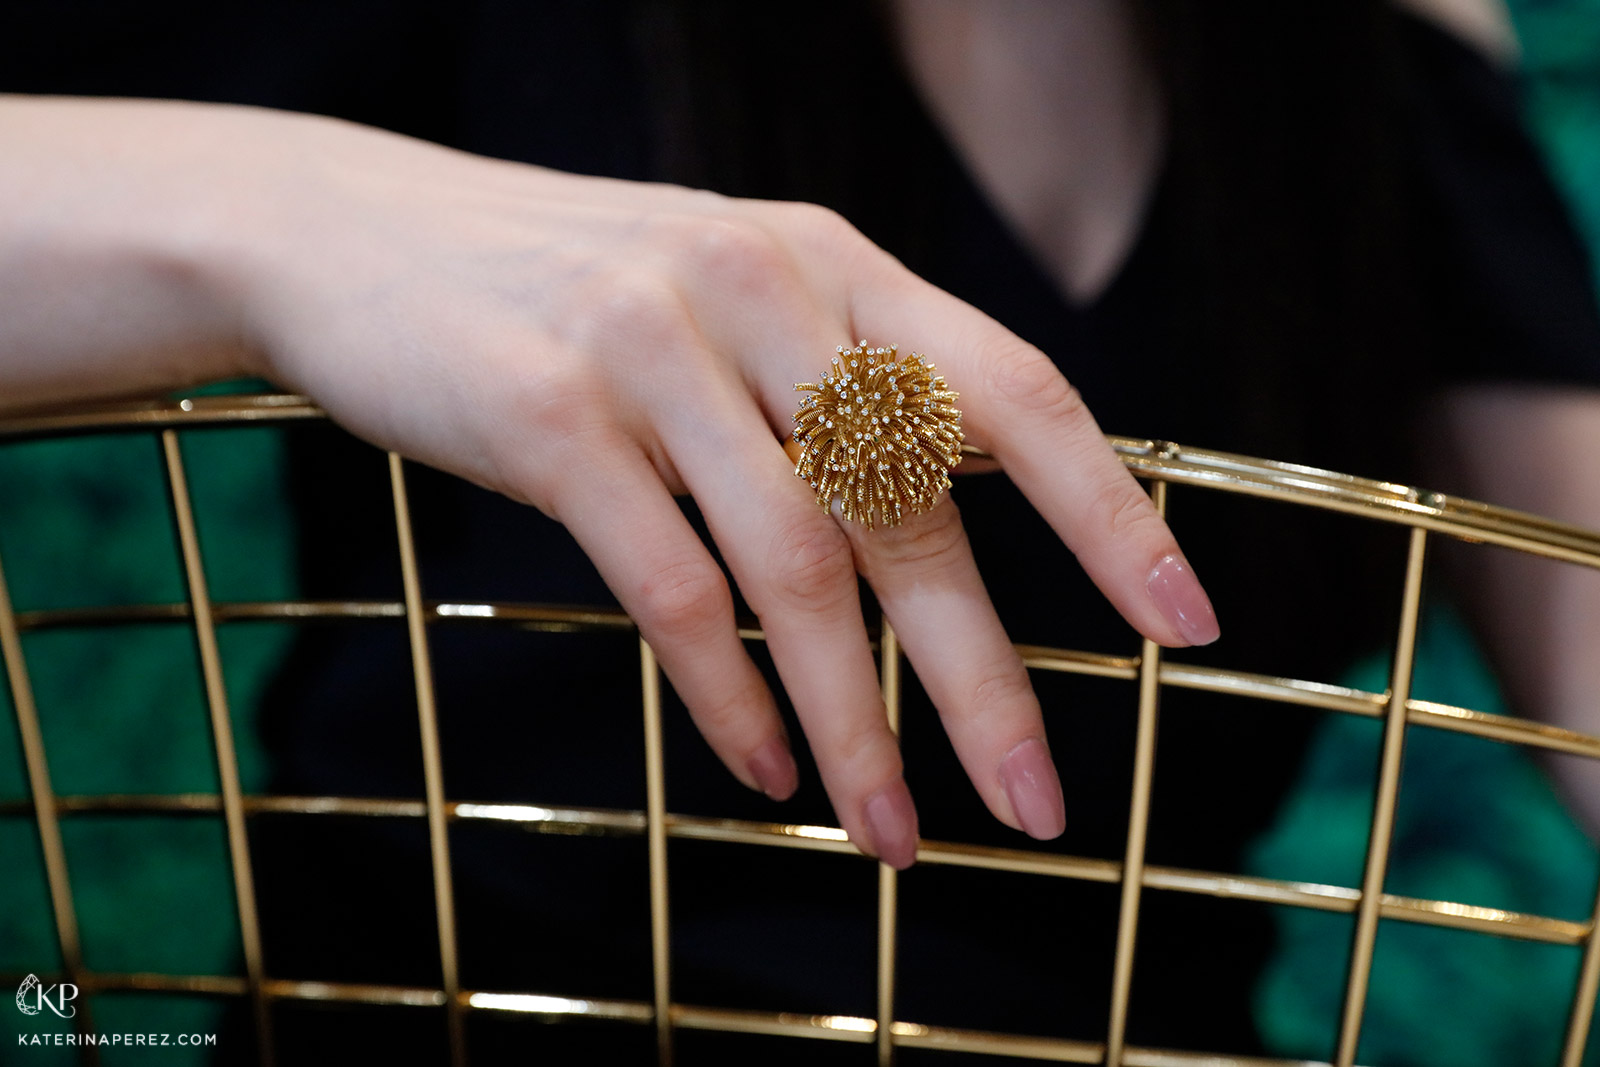 CADAR 'Fur' ring in yellow and diamonds from the 'Second Skin' collection